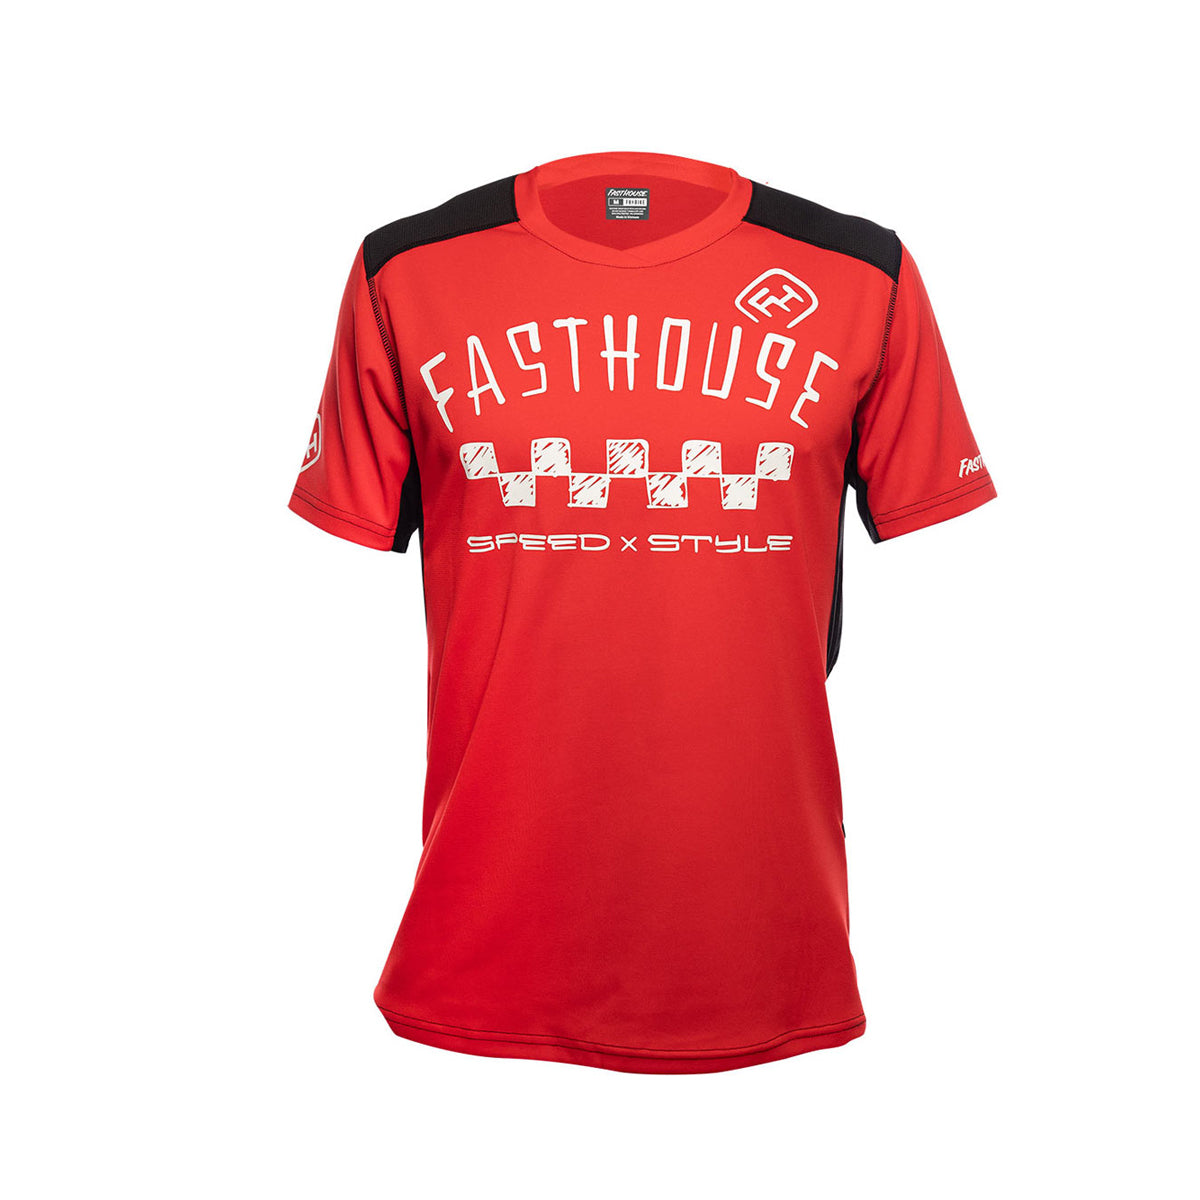 Alloy Nelson SS Youth Jersey - Red